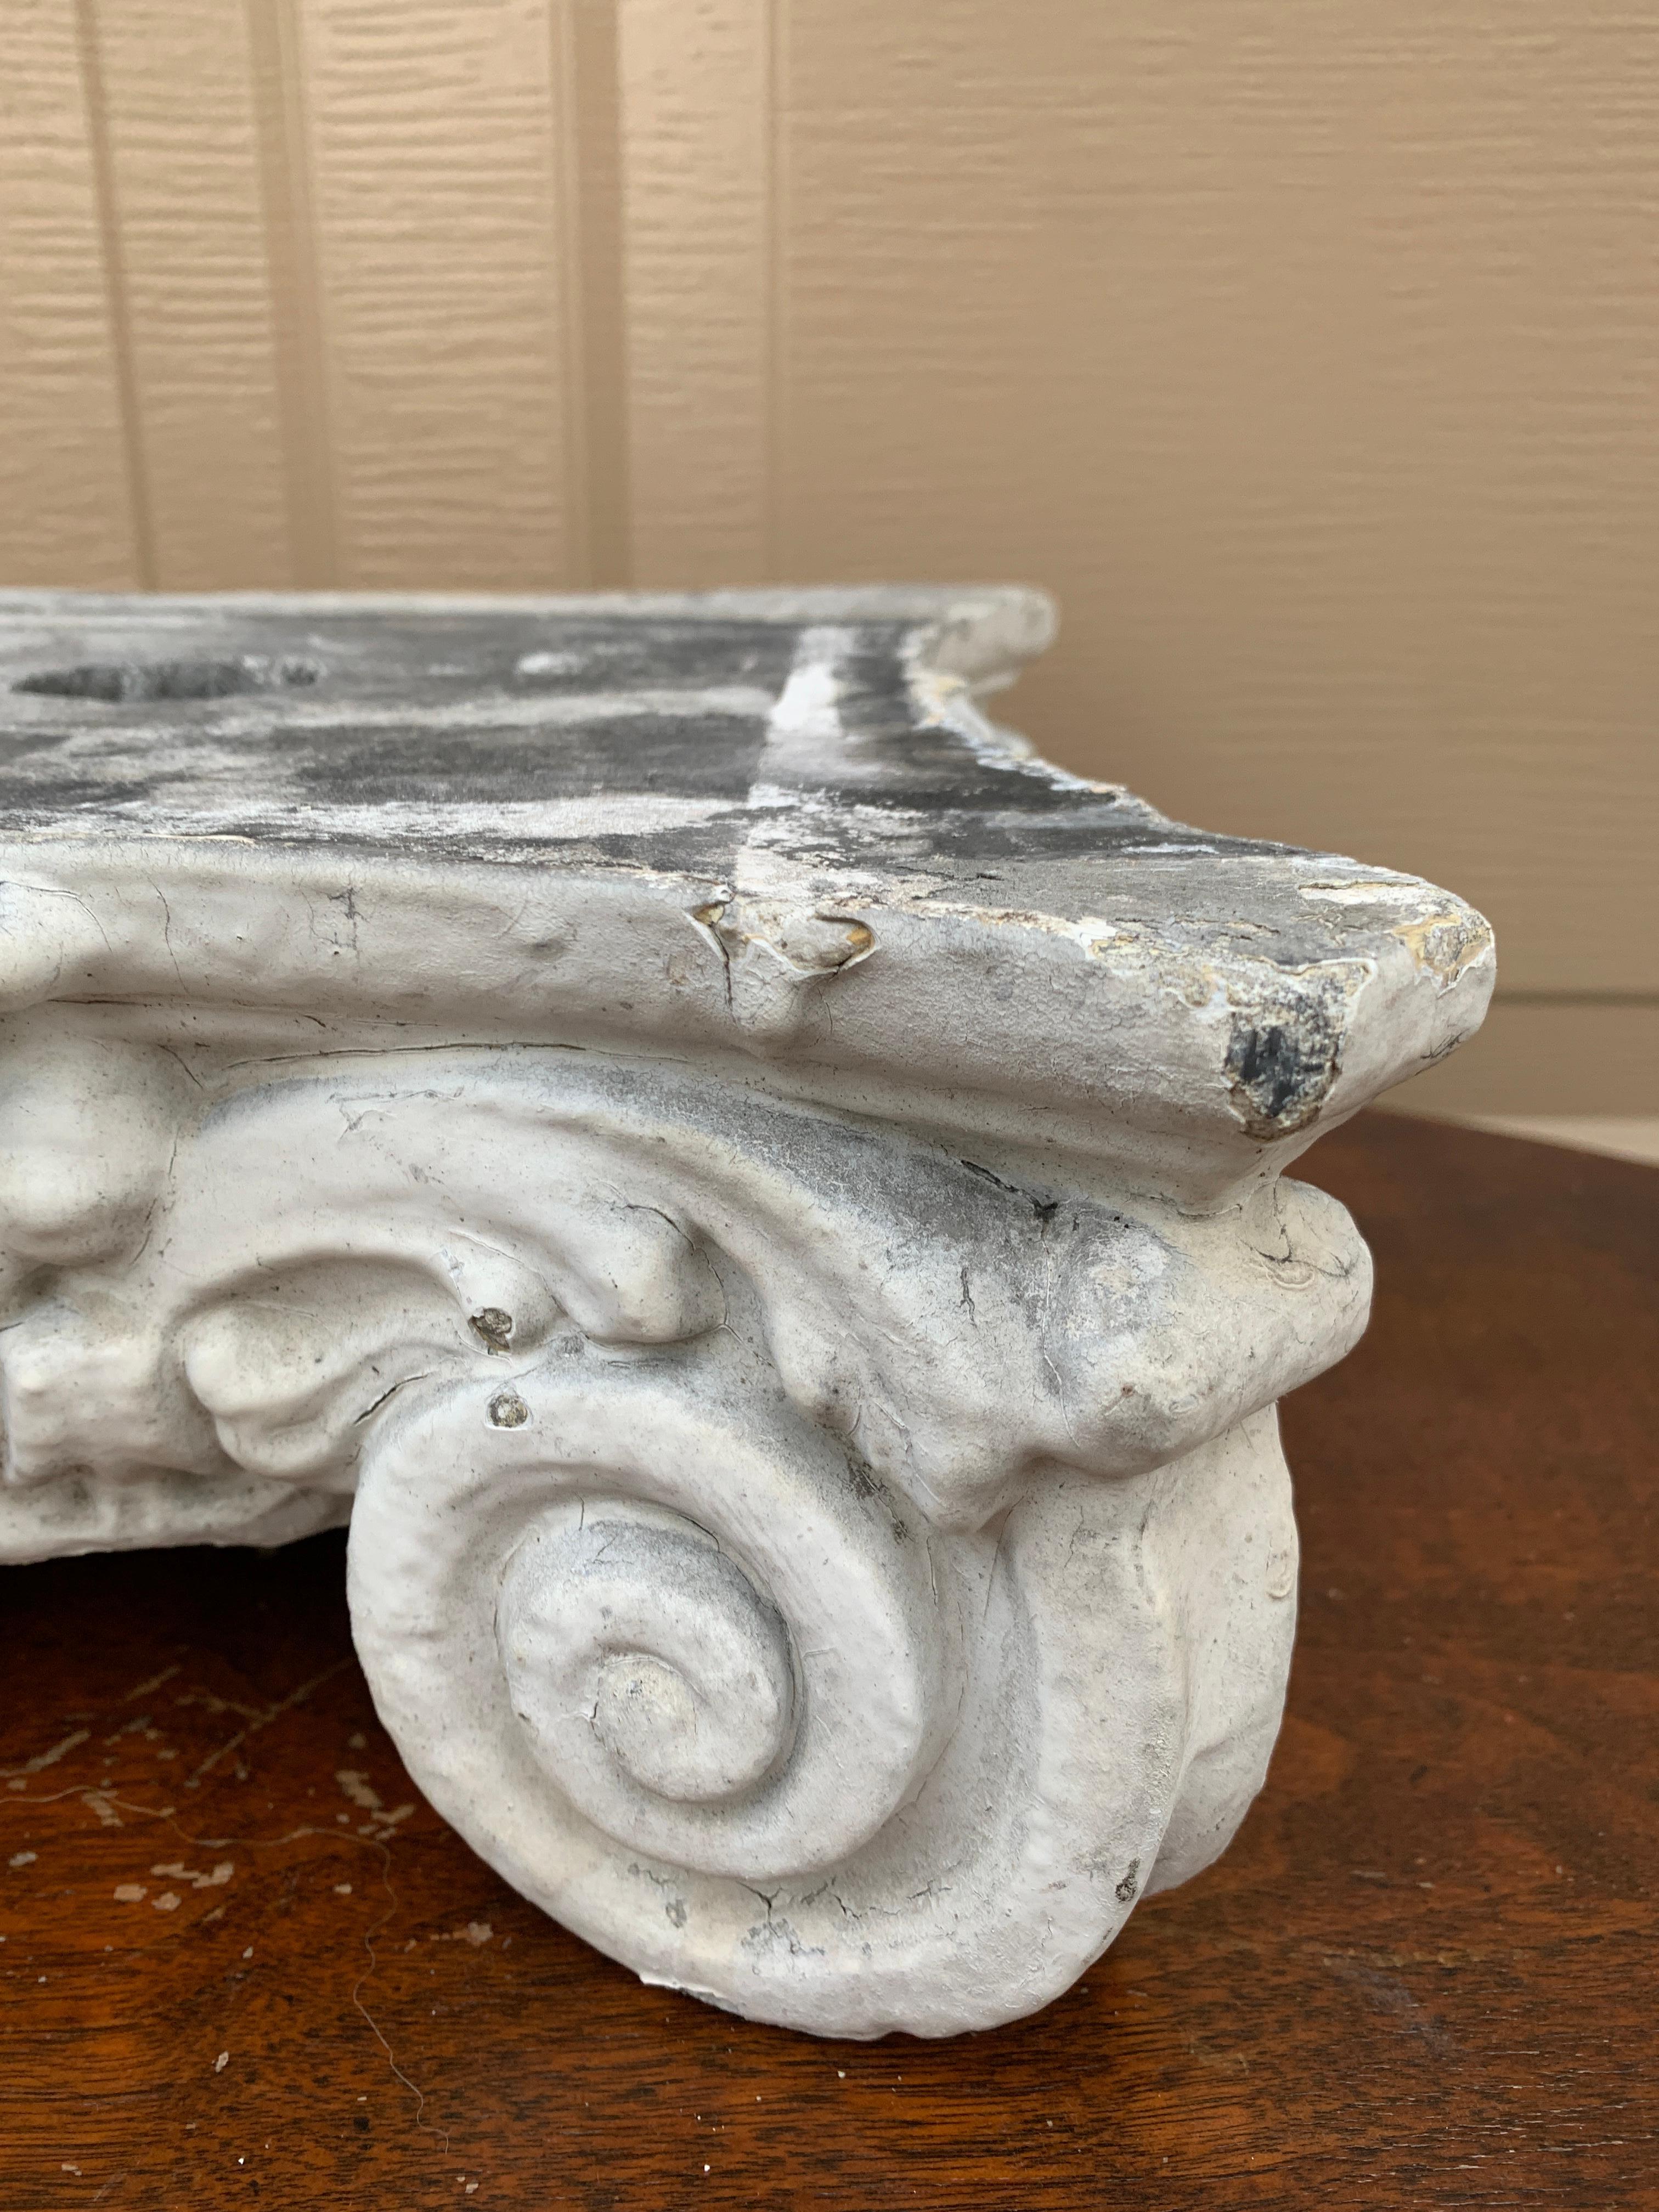 A stunning Greek or Roman Neoclassical style cast stone Ionic column capital. This piece of architectural salvage would make a lovely objet d'art, sculpture, garden ornament, or stand for a sculpture or plant.

USA, Late 19th Century

Measures: